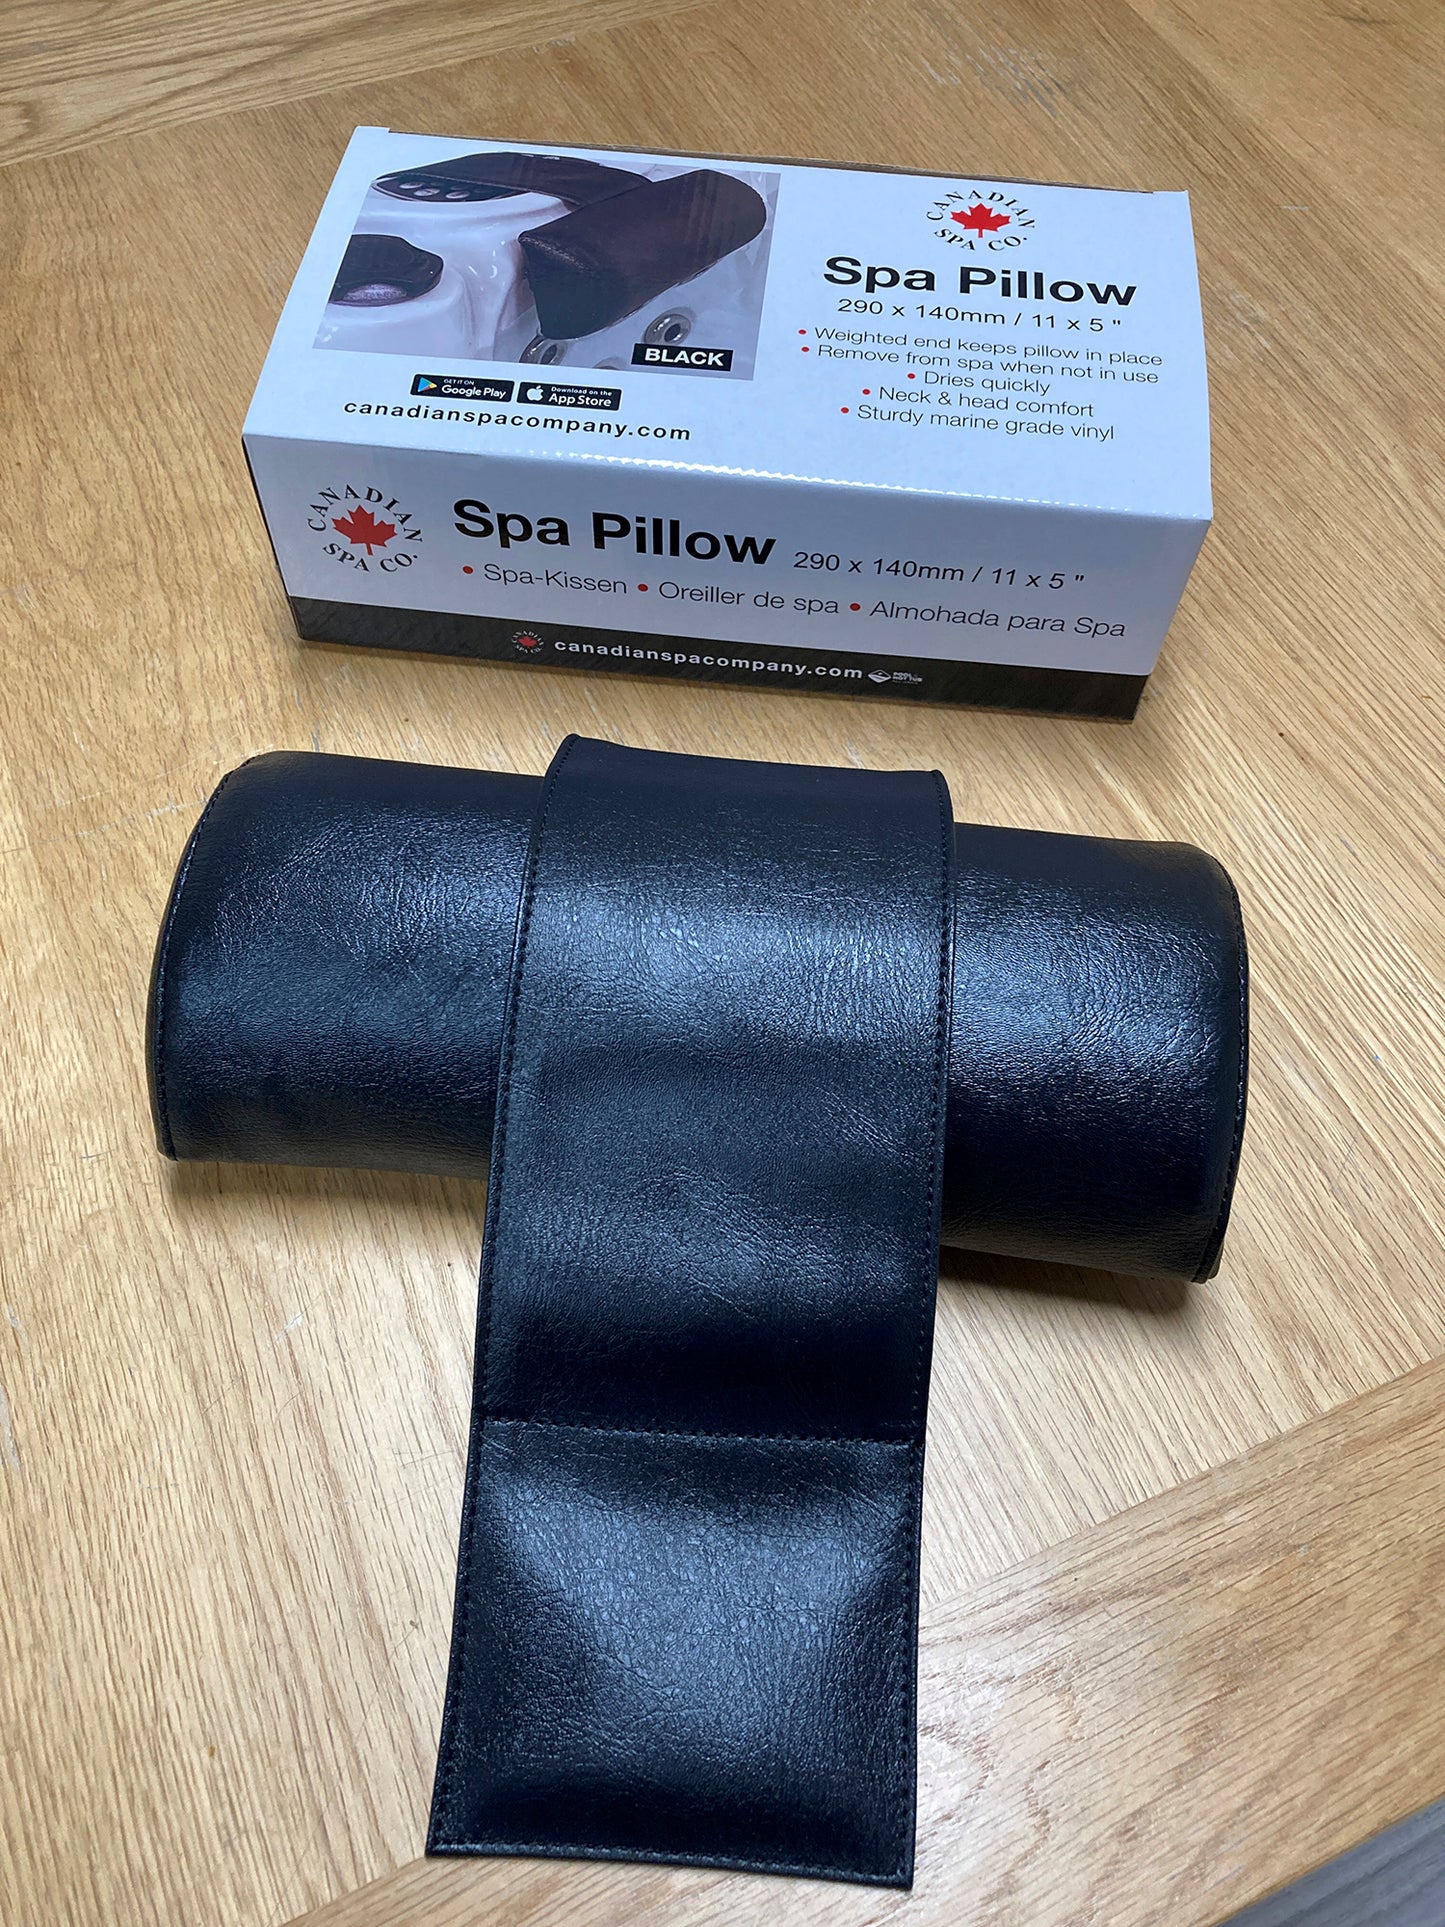 Weighted Spa Headrest / Pillow - works with both portable and acrylic spas